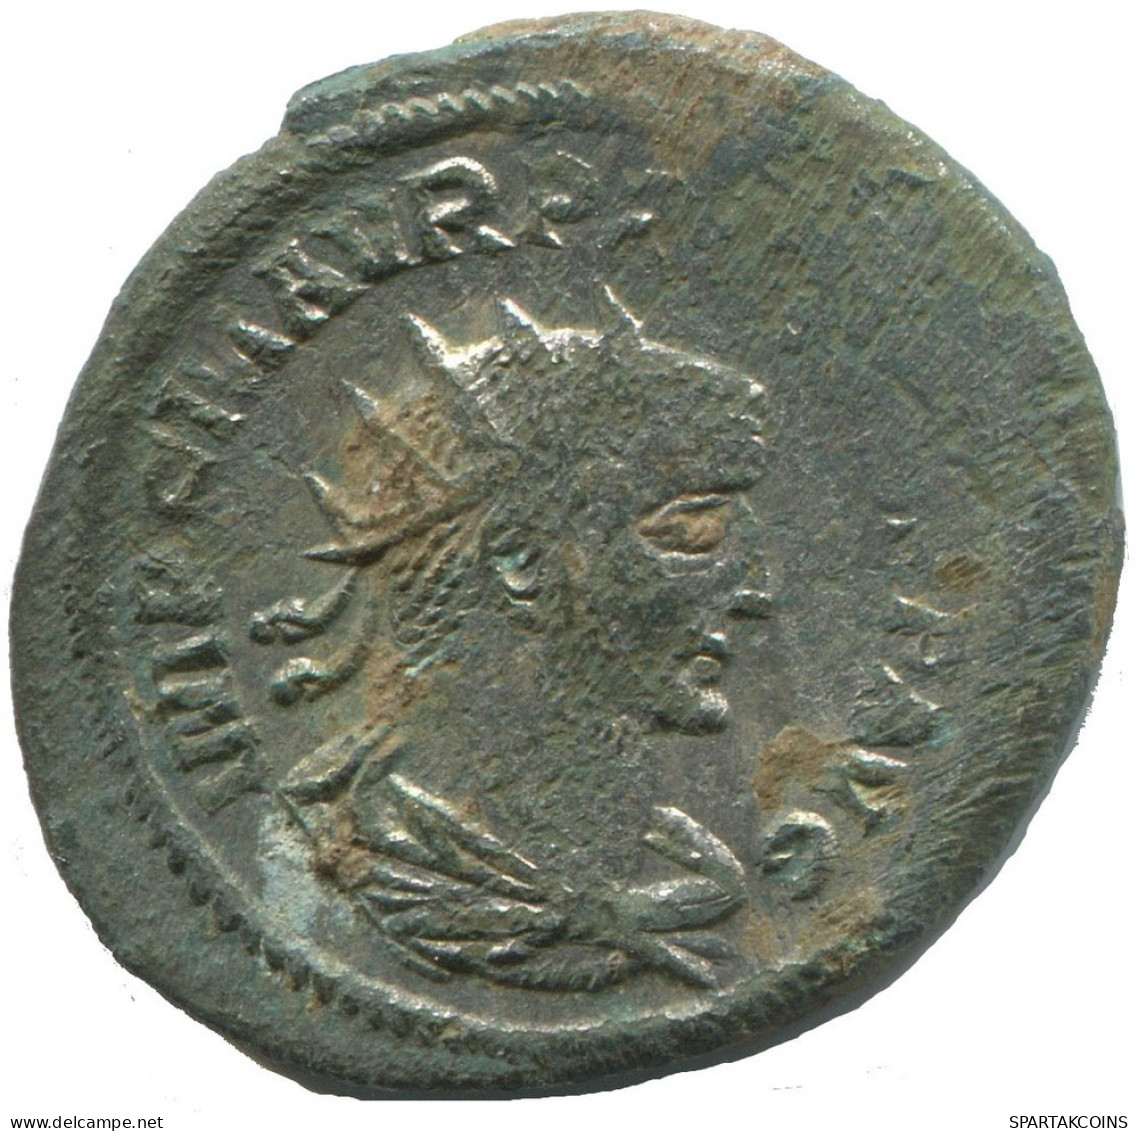 PROBUS ANTIOCH AD276-282 SILVERED LATE ROMAN Moneda 4.4g/24mm #ANT2660.41.E.A - The Military Crisis (235 AD Tot 284 AD)